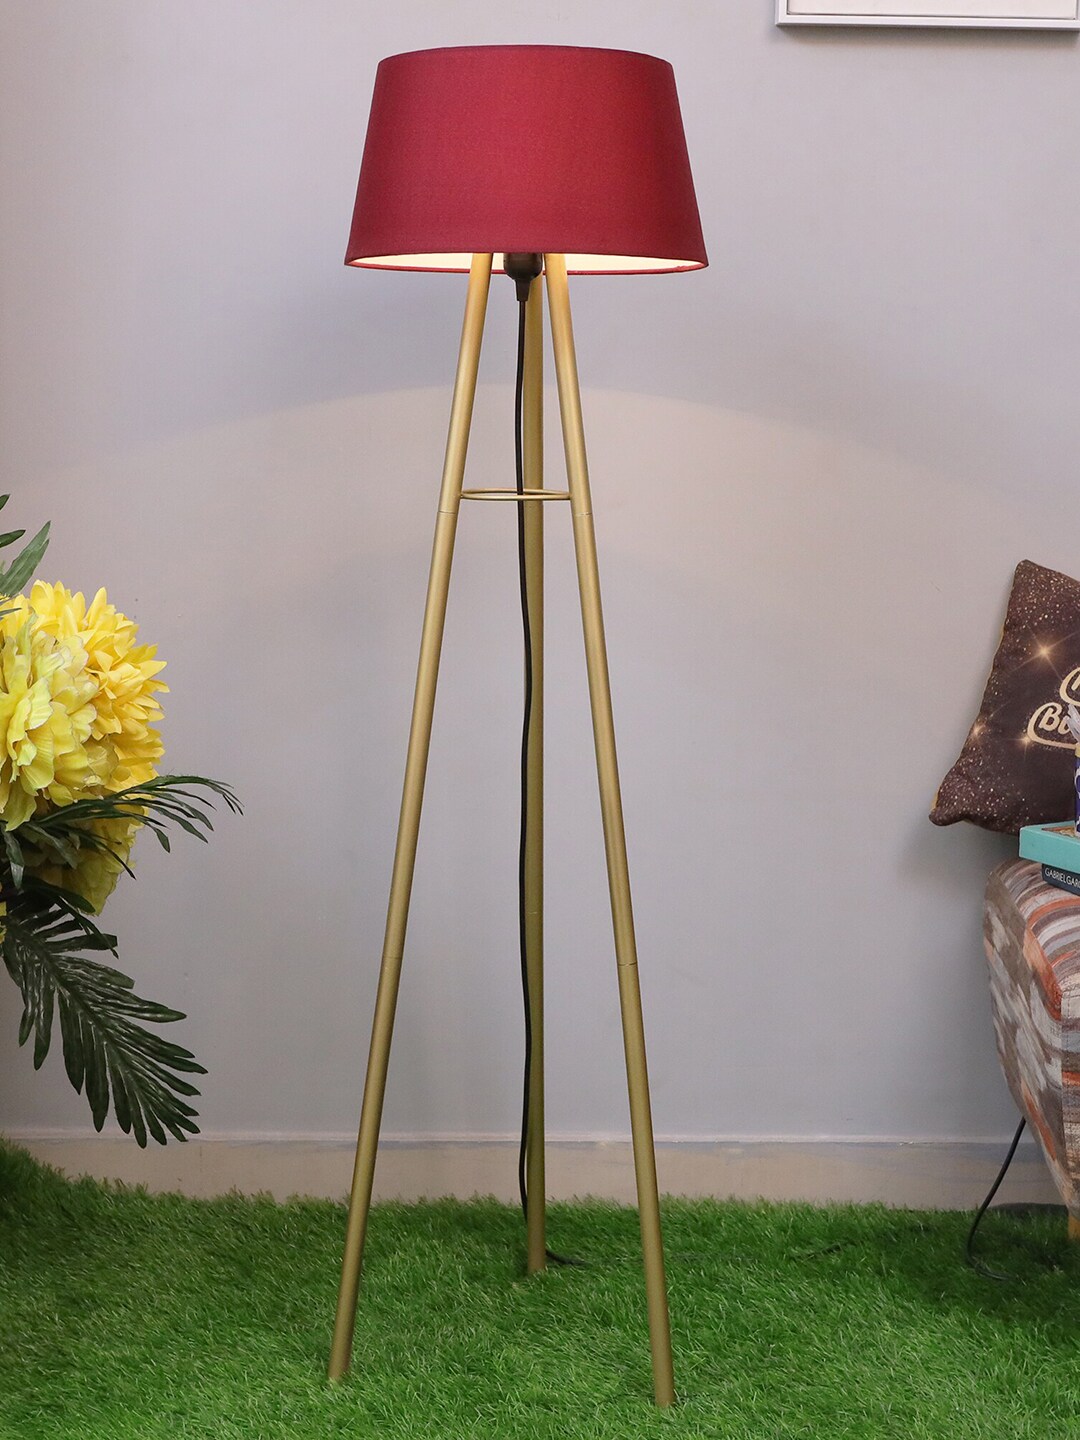 Homesake Red Metal Tripod Floor Lamp With Shade Price in India